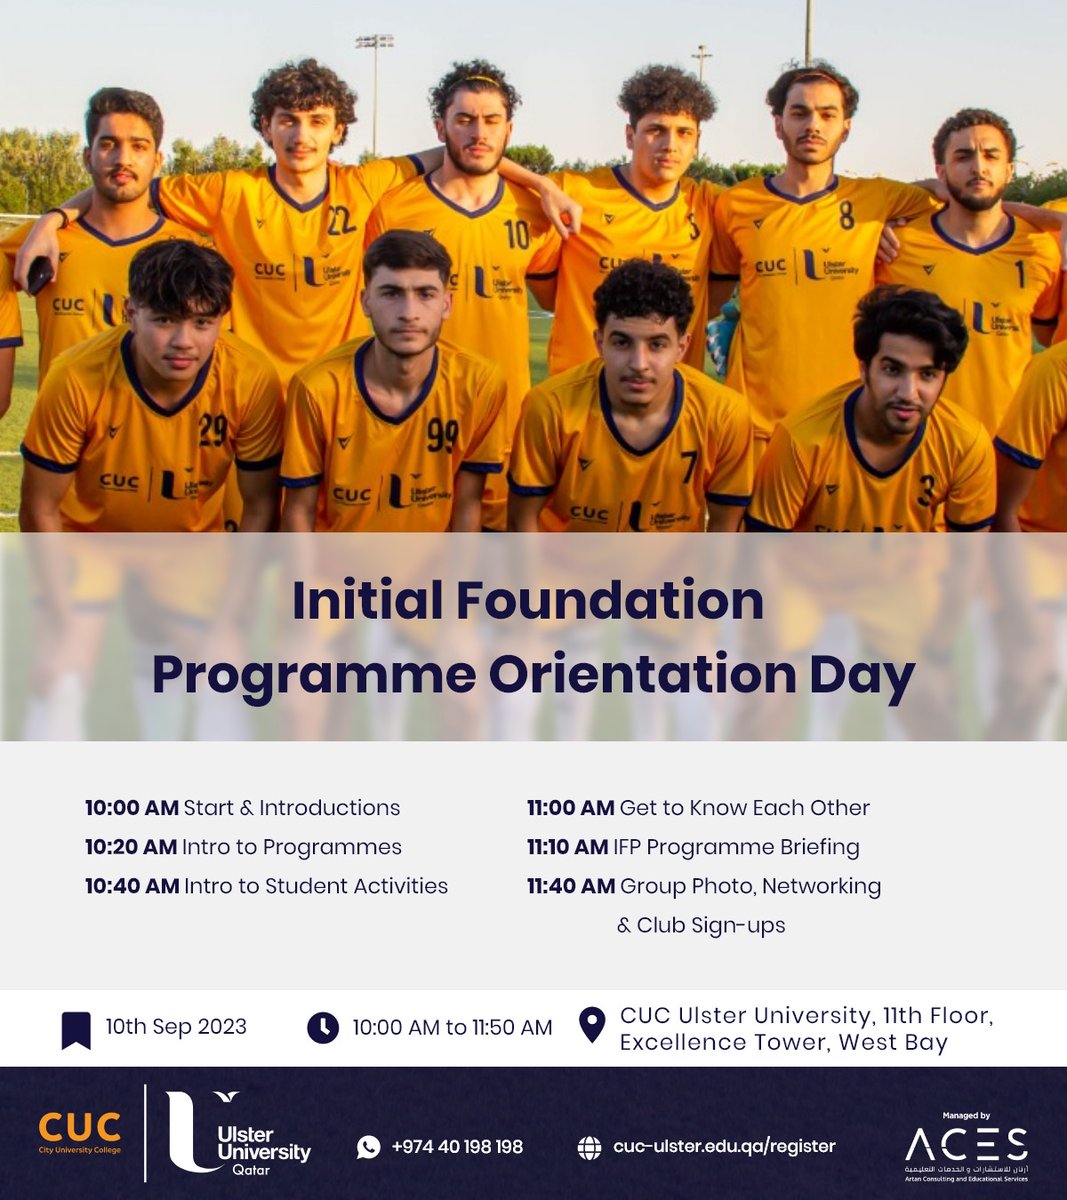 Welcome to all our new IFP students joining CUC Ulster University today! Have a look at our orientation day schedule. See you there!

Looking forward to seeing all of you on campus!!

#StudyInQatar #CUCUlster #WeBuildCareers #UniversityOfTheFuture #InternationalStudents #Doha…